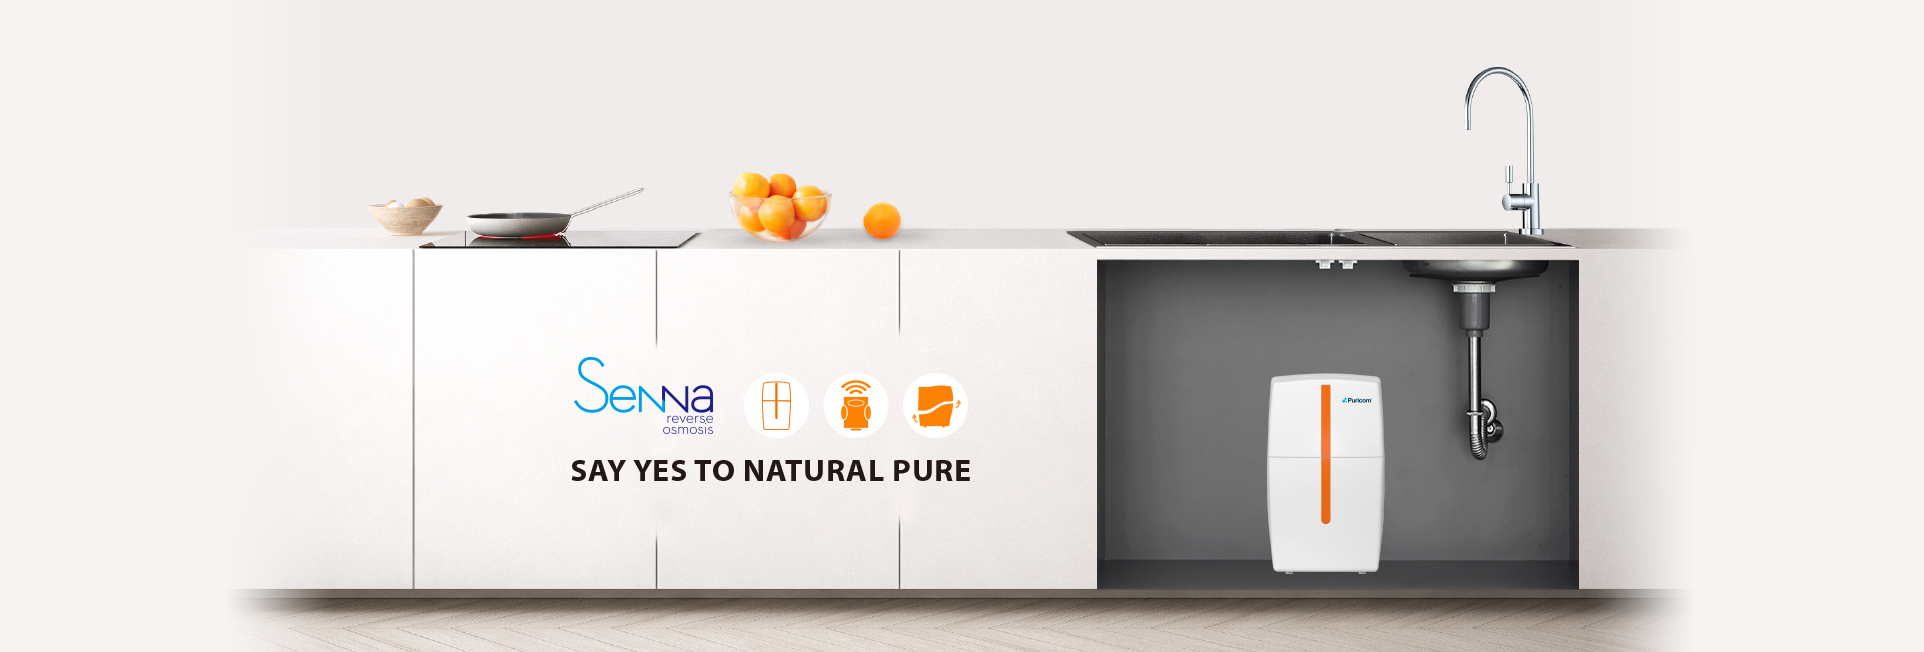 CQE-R3 Compact RO System of Puricom - Say Yes to Natural Pure